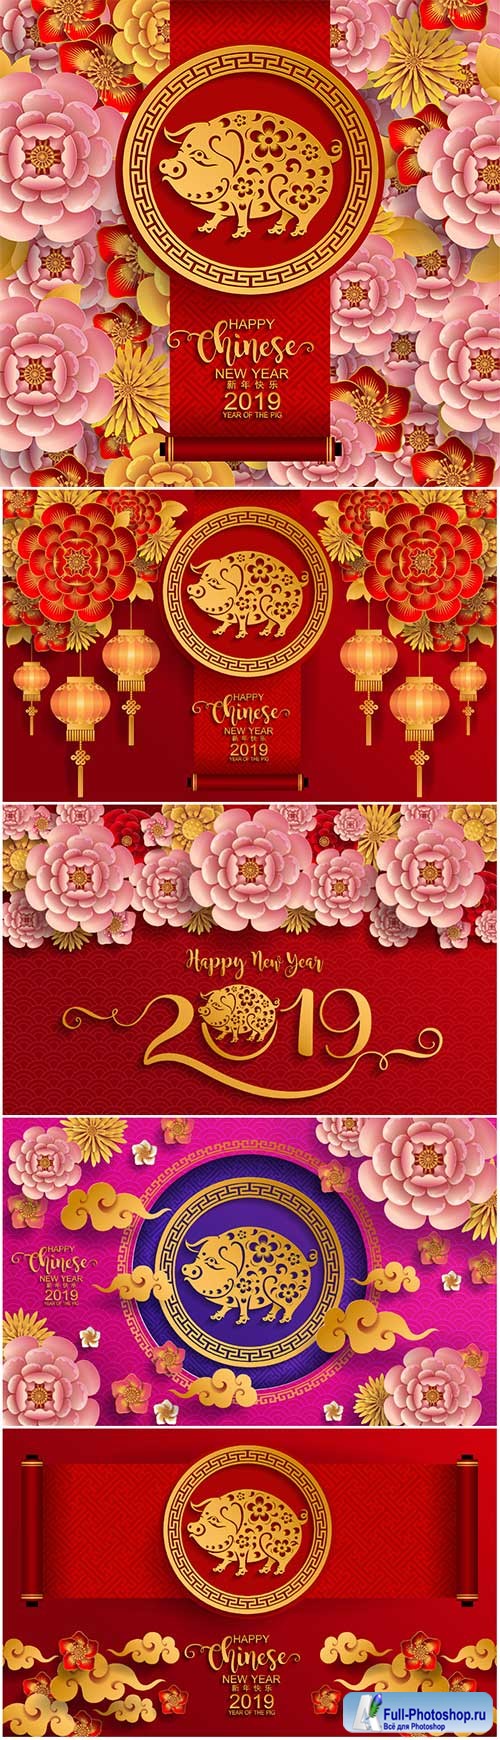 Pig year 2019 chinese luxury vector card # 2